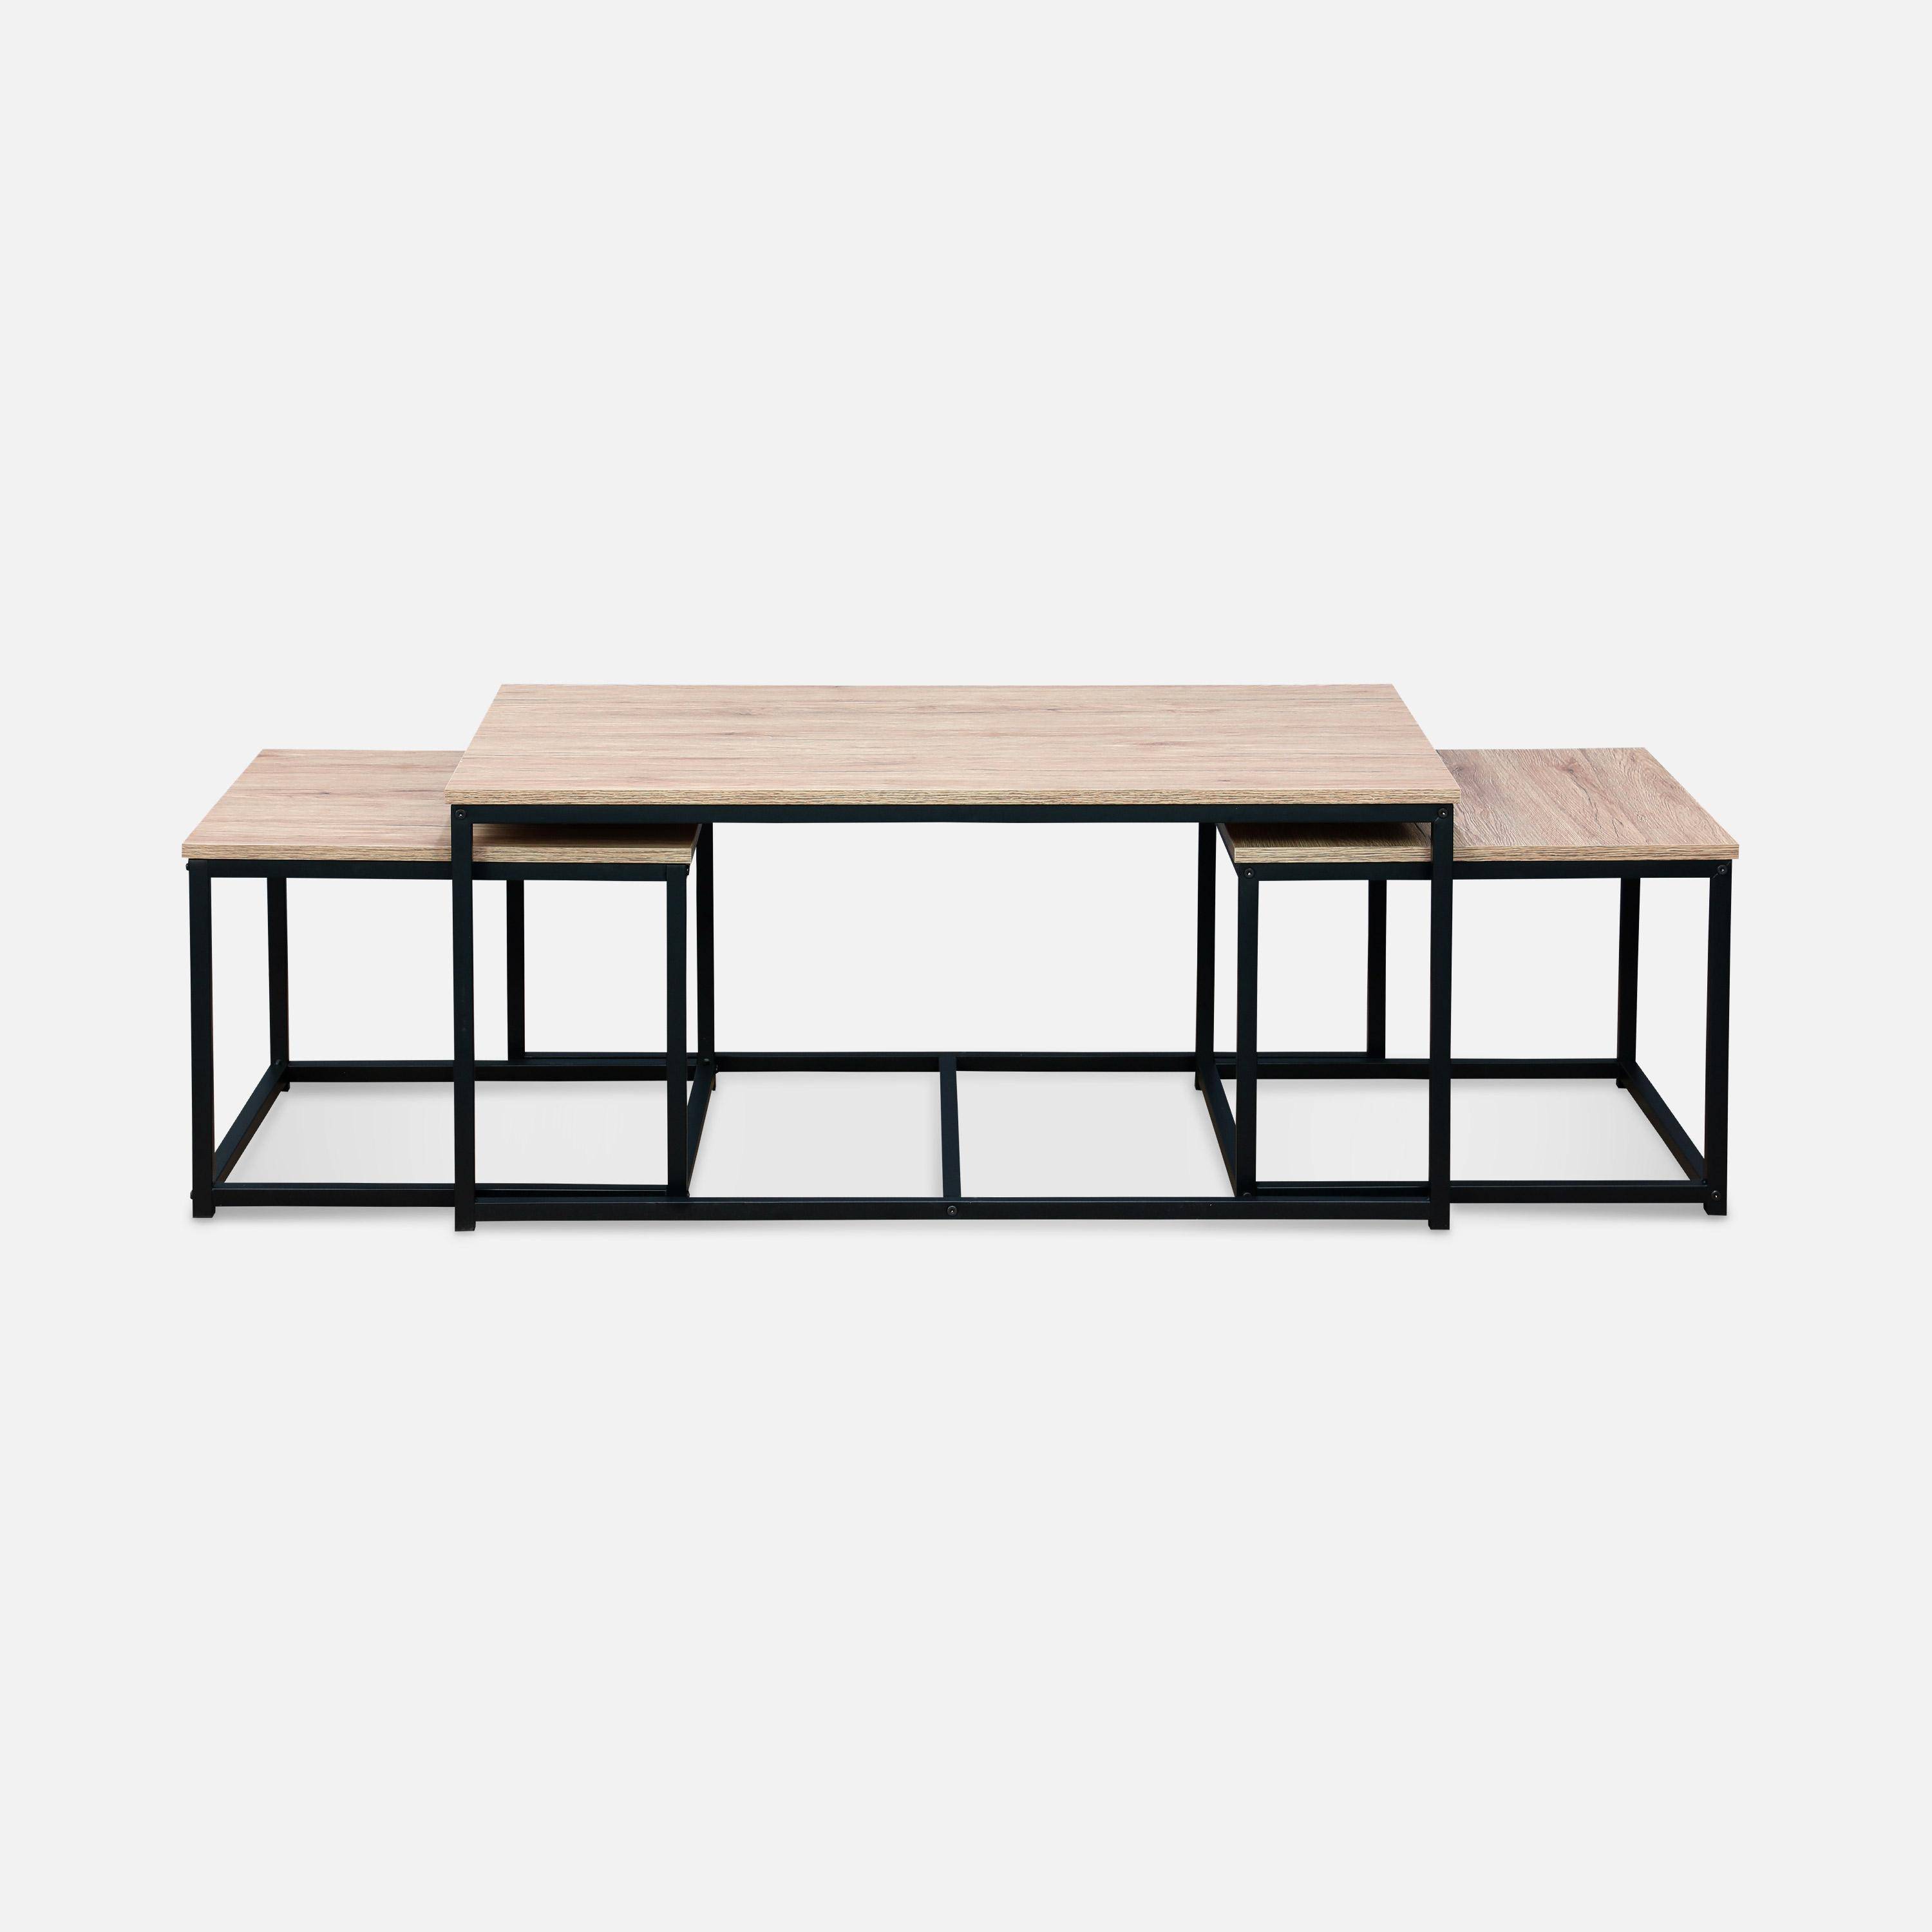 Set of 3 metal and wood-effect nesting tables, large table 100x60x45cm, 2x small tables 50x50x38cm - Loft - Black,sweeek,Photo4